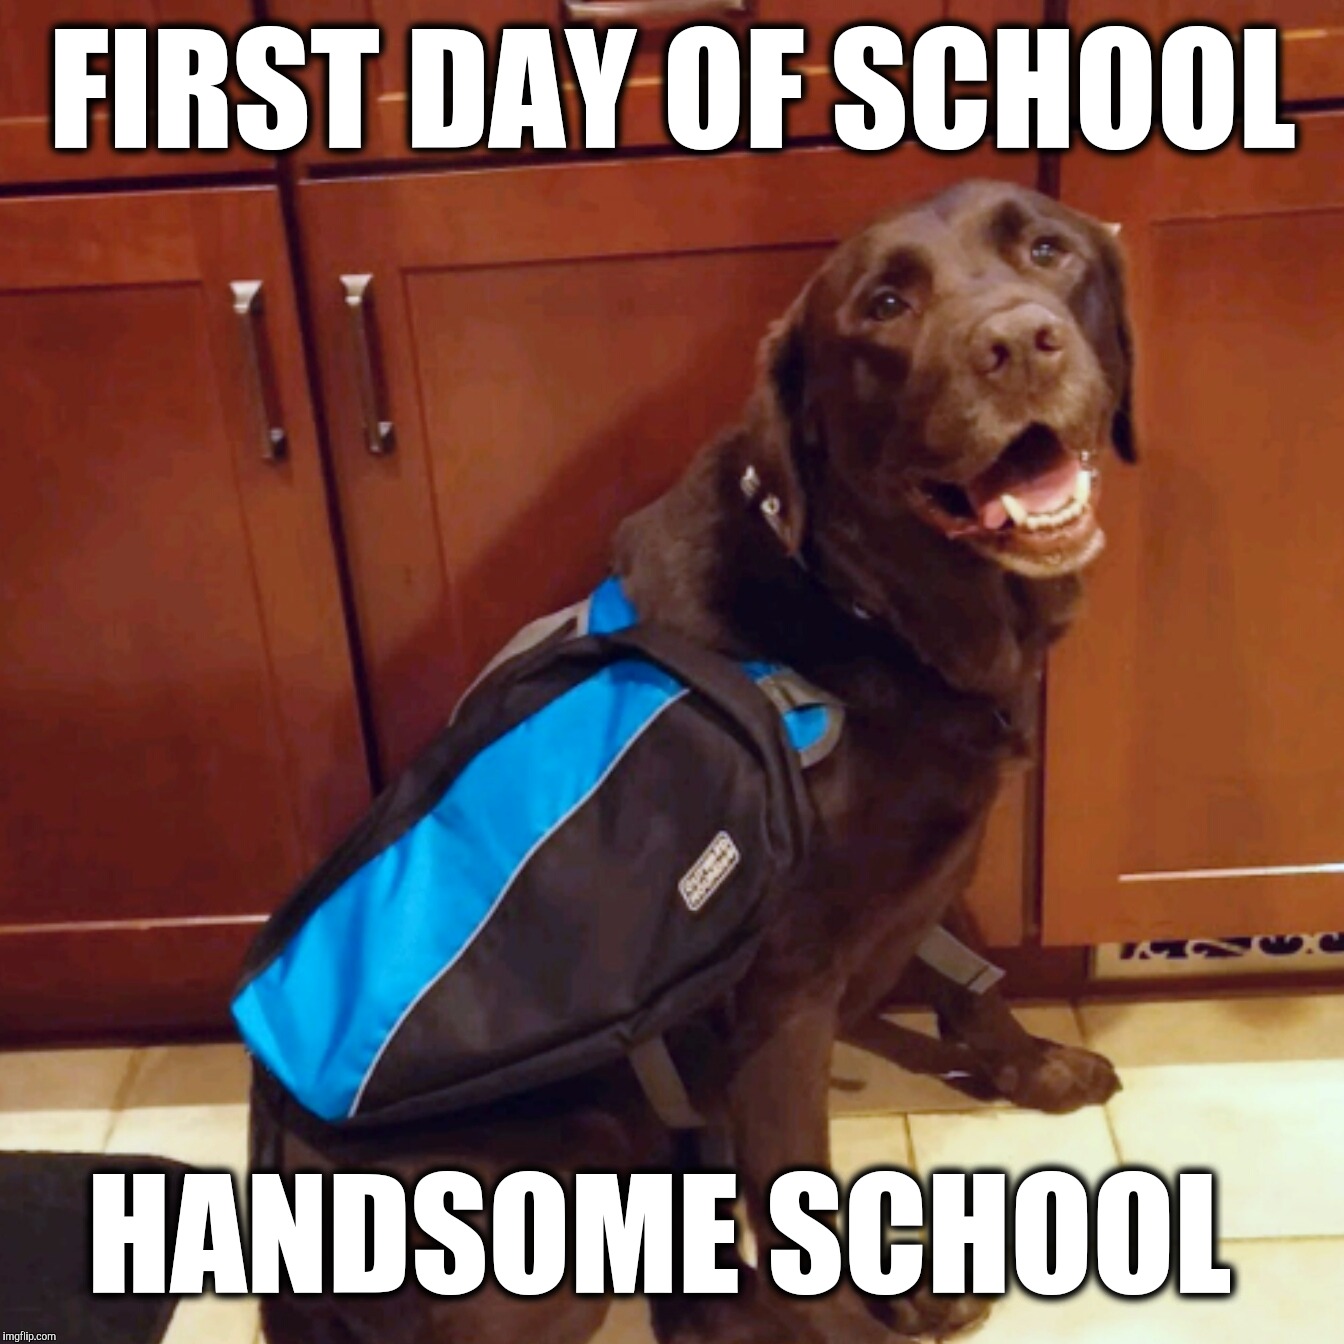 First day of handsome school  | FIRST DAY OF SCHOOL; HANDSOME SCHOOL | image tagged in chuckie the chocolate lab,first day of school,handsome,funny,cute dog,funny dog memes | made w/ Imgflip meme maker